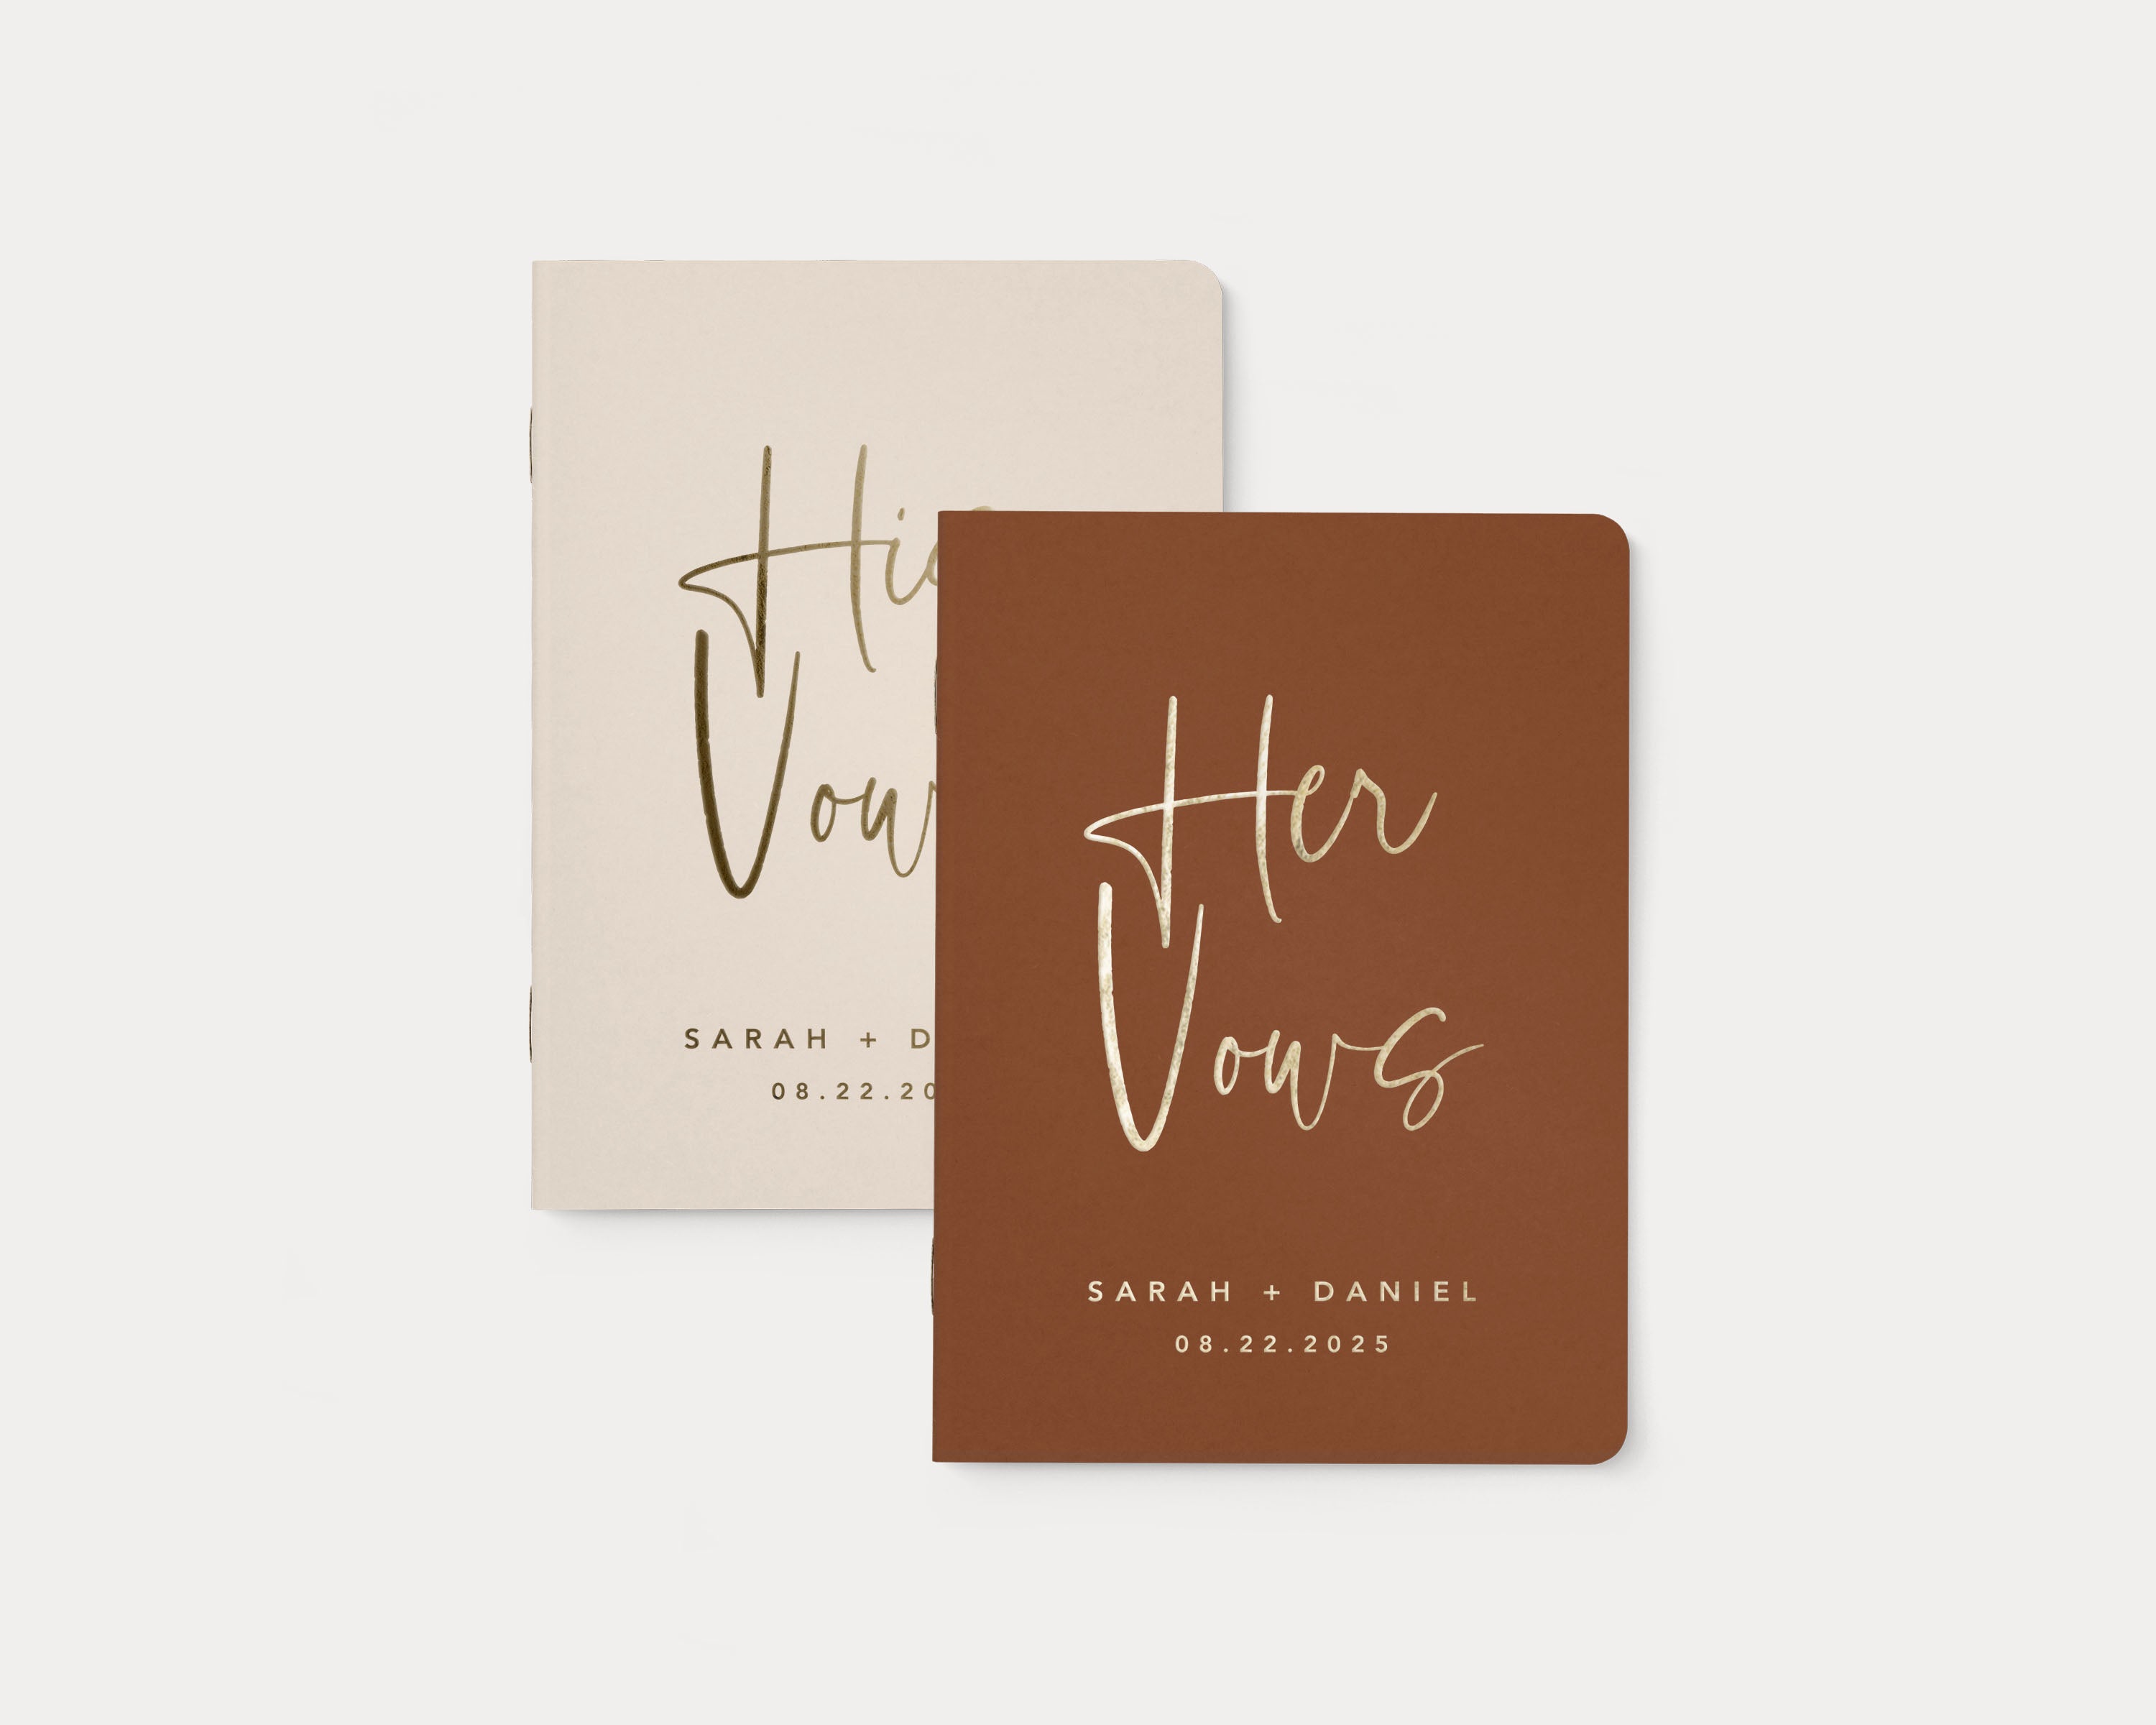 Set of 2 wedding vow books with gold foil personalization.